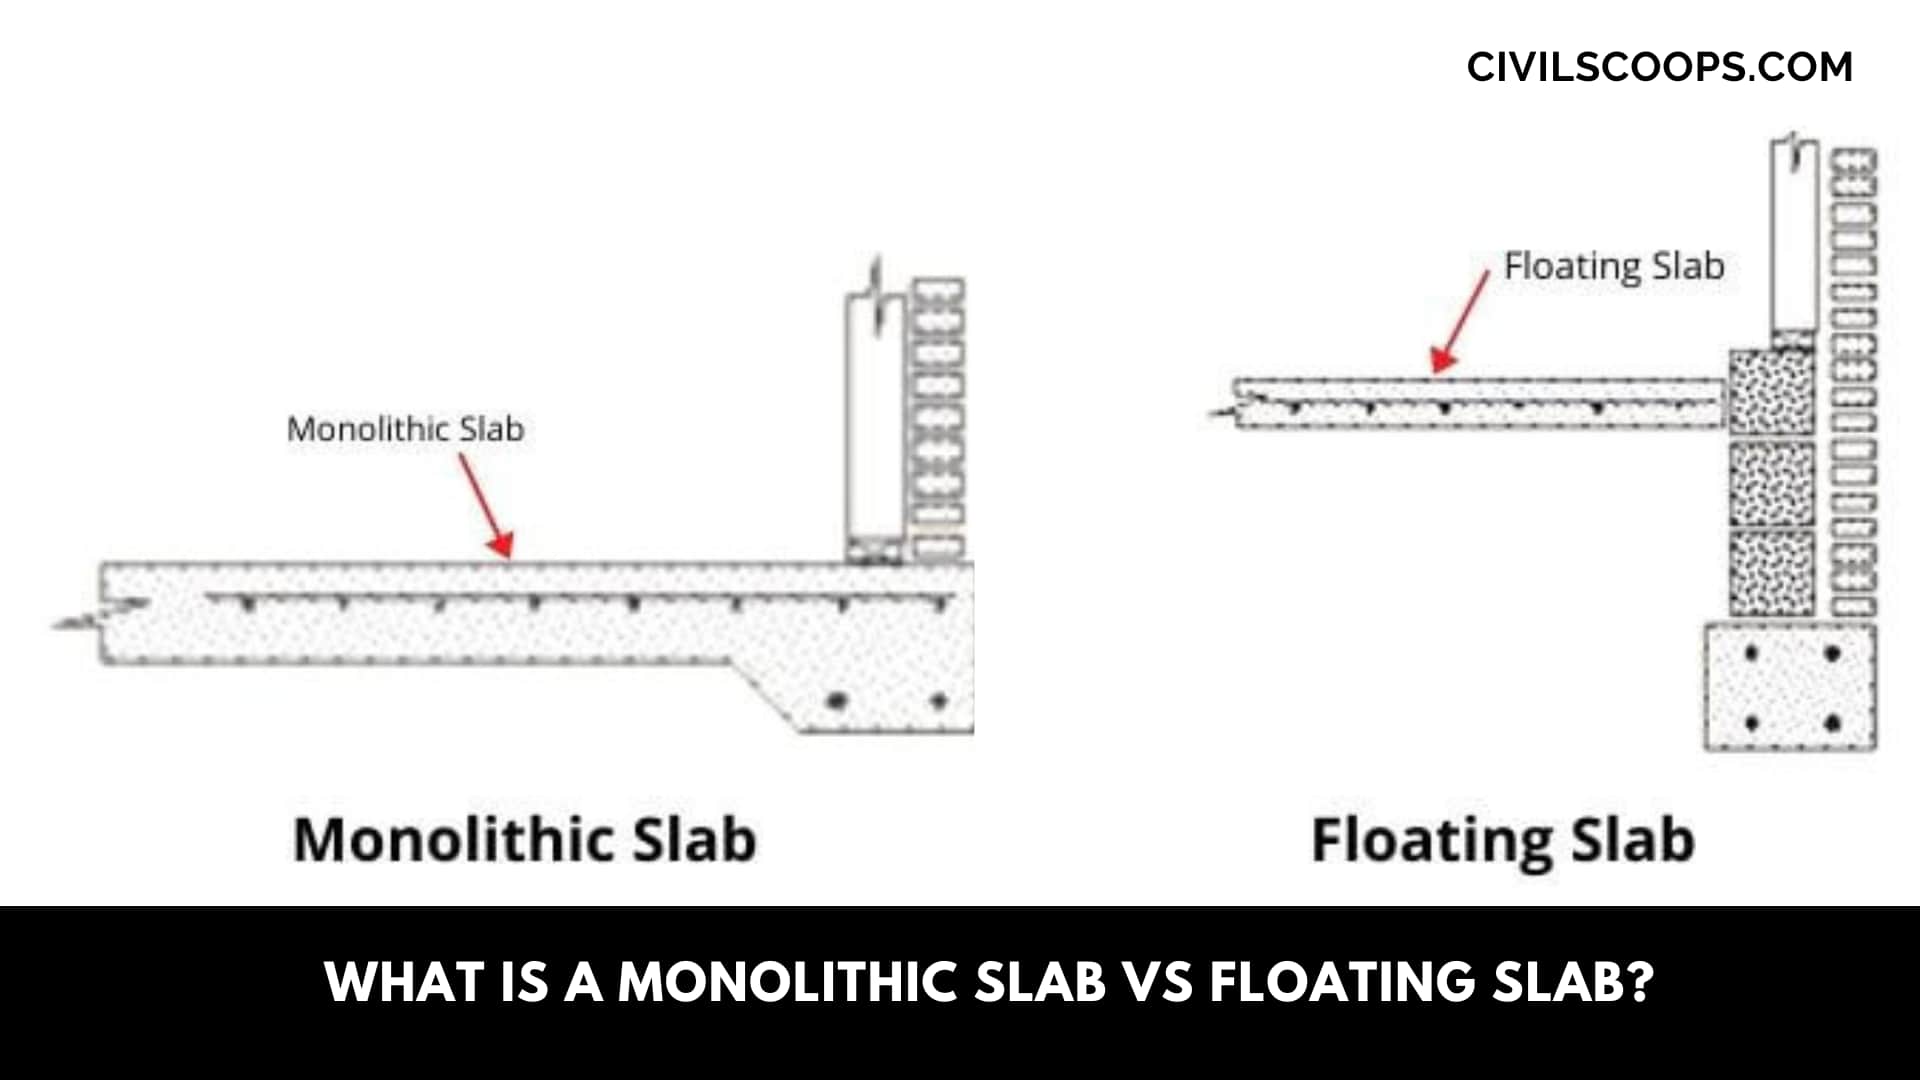 What is a Monolithic Slab VS Floating Slab?